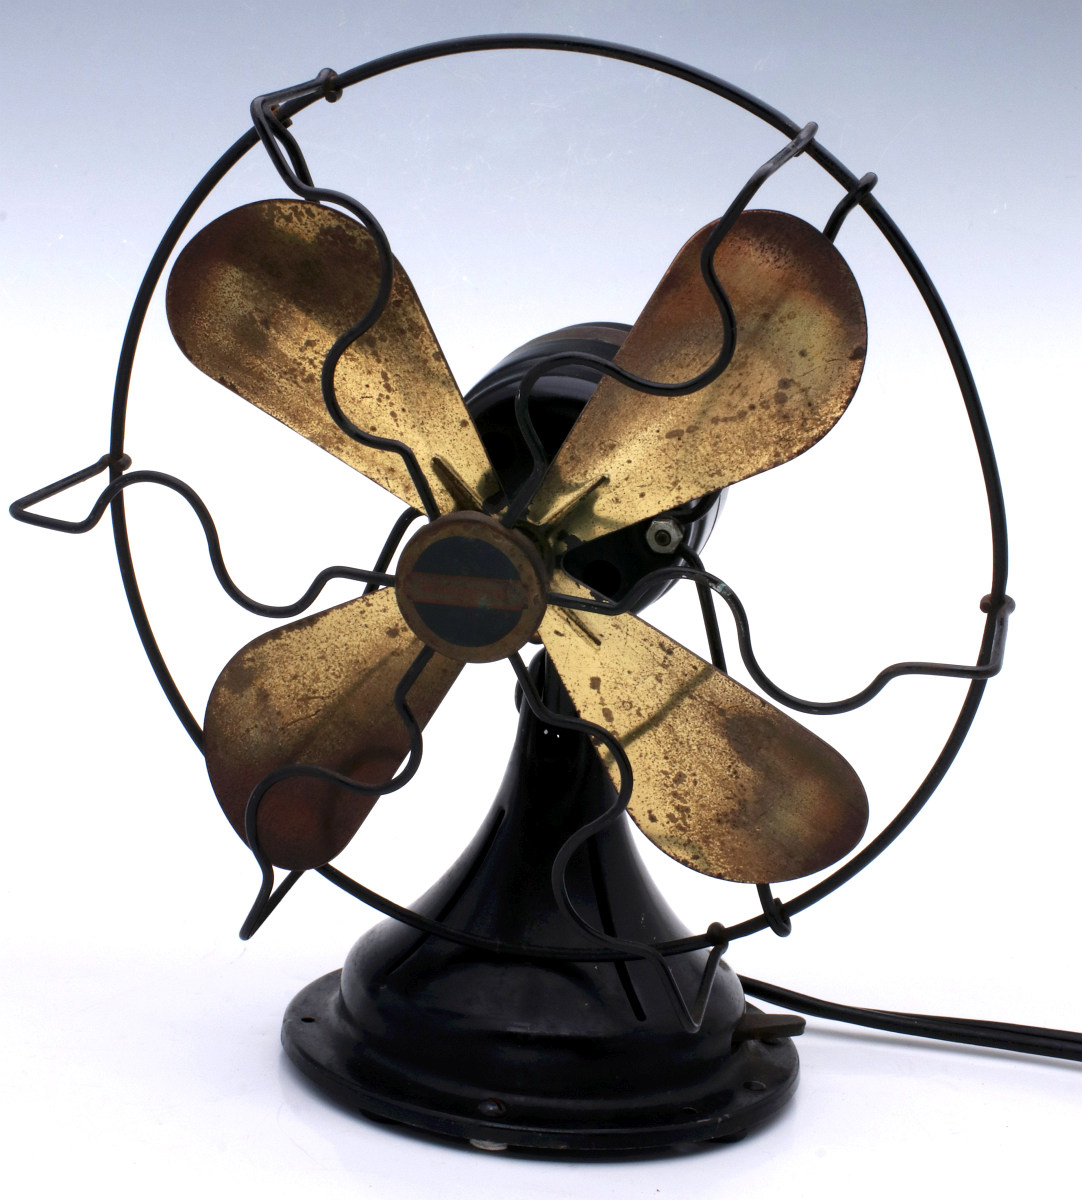 A WINCHESTER REPEATING ARMS CO. ELECTRIC FAN